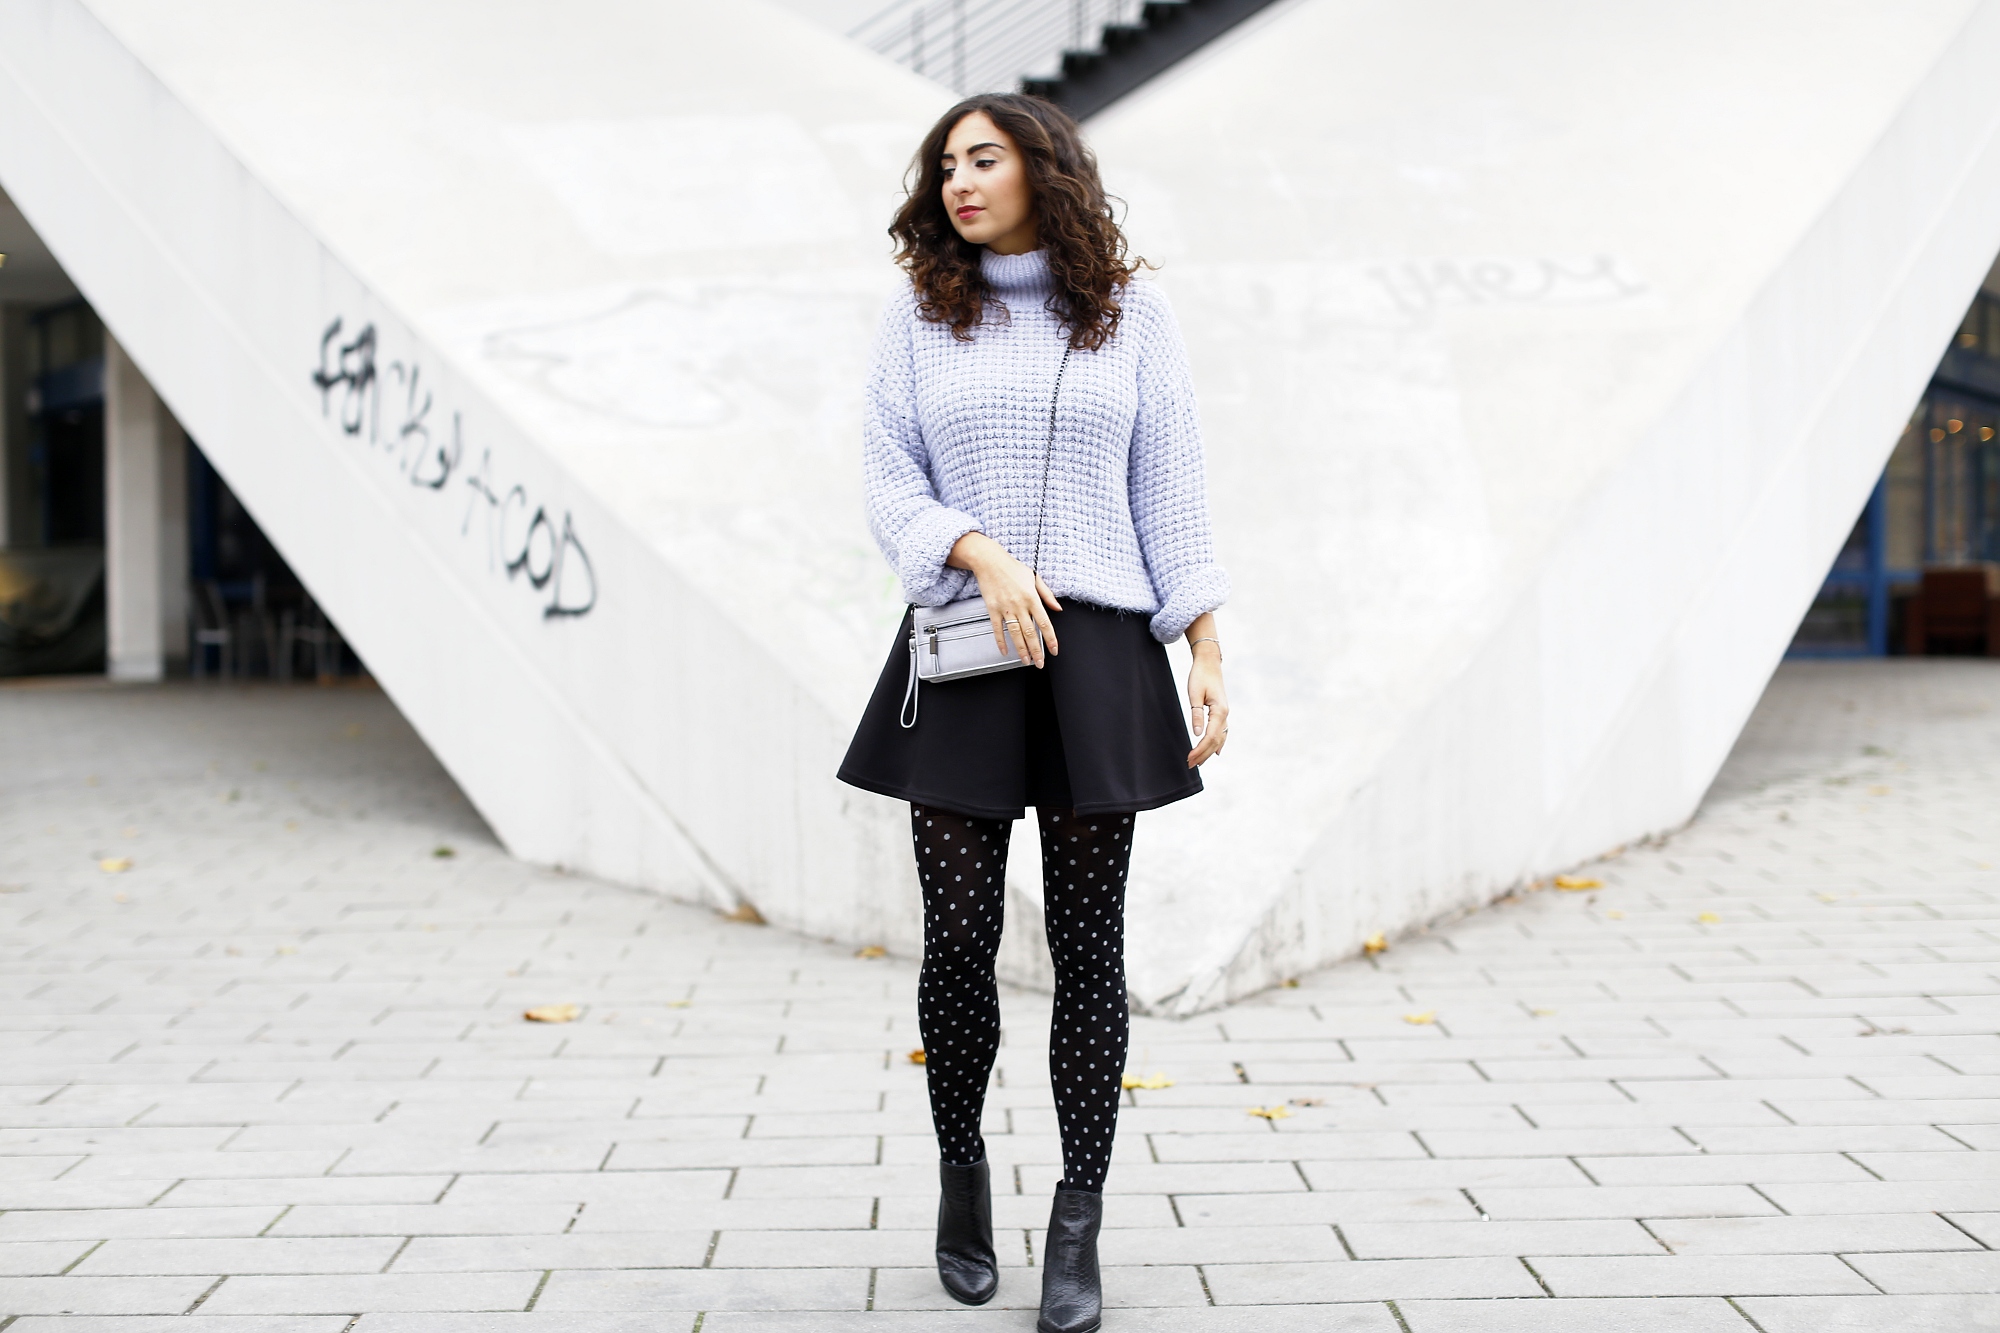 Black Pointed Booties light blue tutleneck sweater skater skirt in winter girly skirt in winter dotted tights pantihoses pointed booties silver detials accessoiry ice blue baby blue bershka sweater modeblog berlin streetstyle preppy look